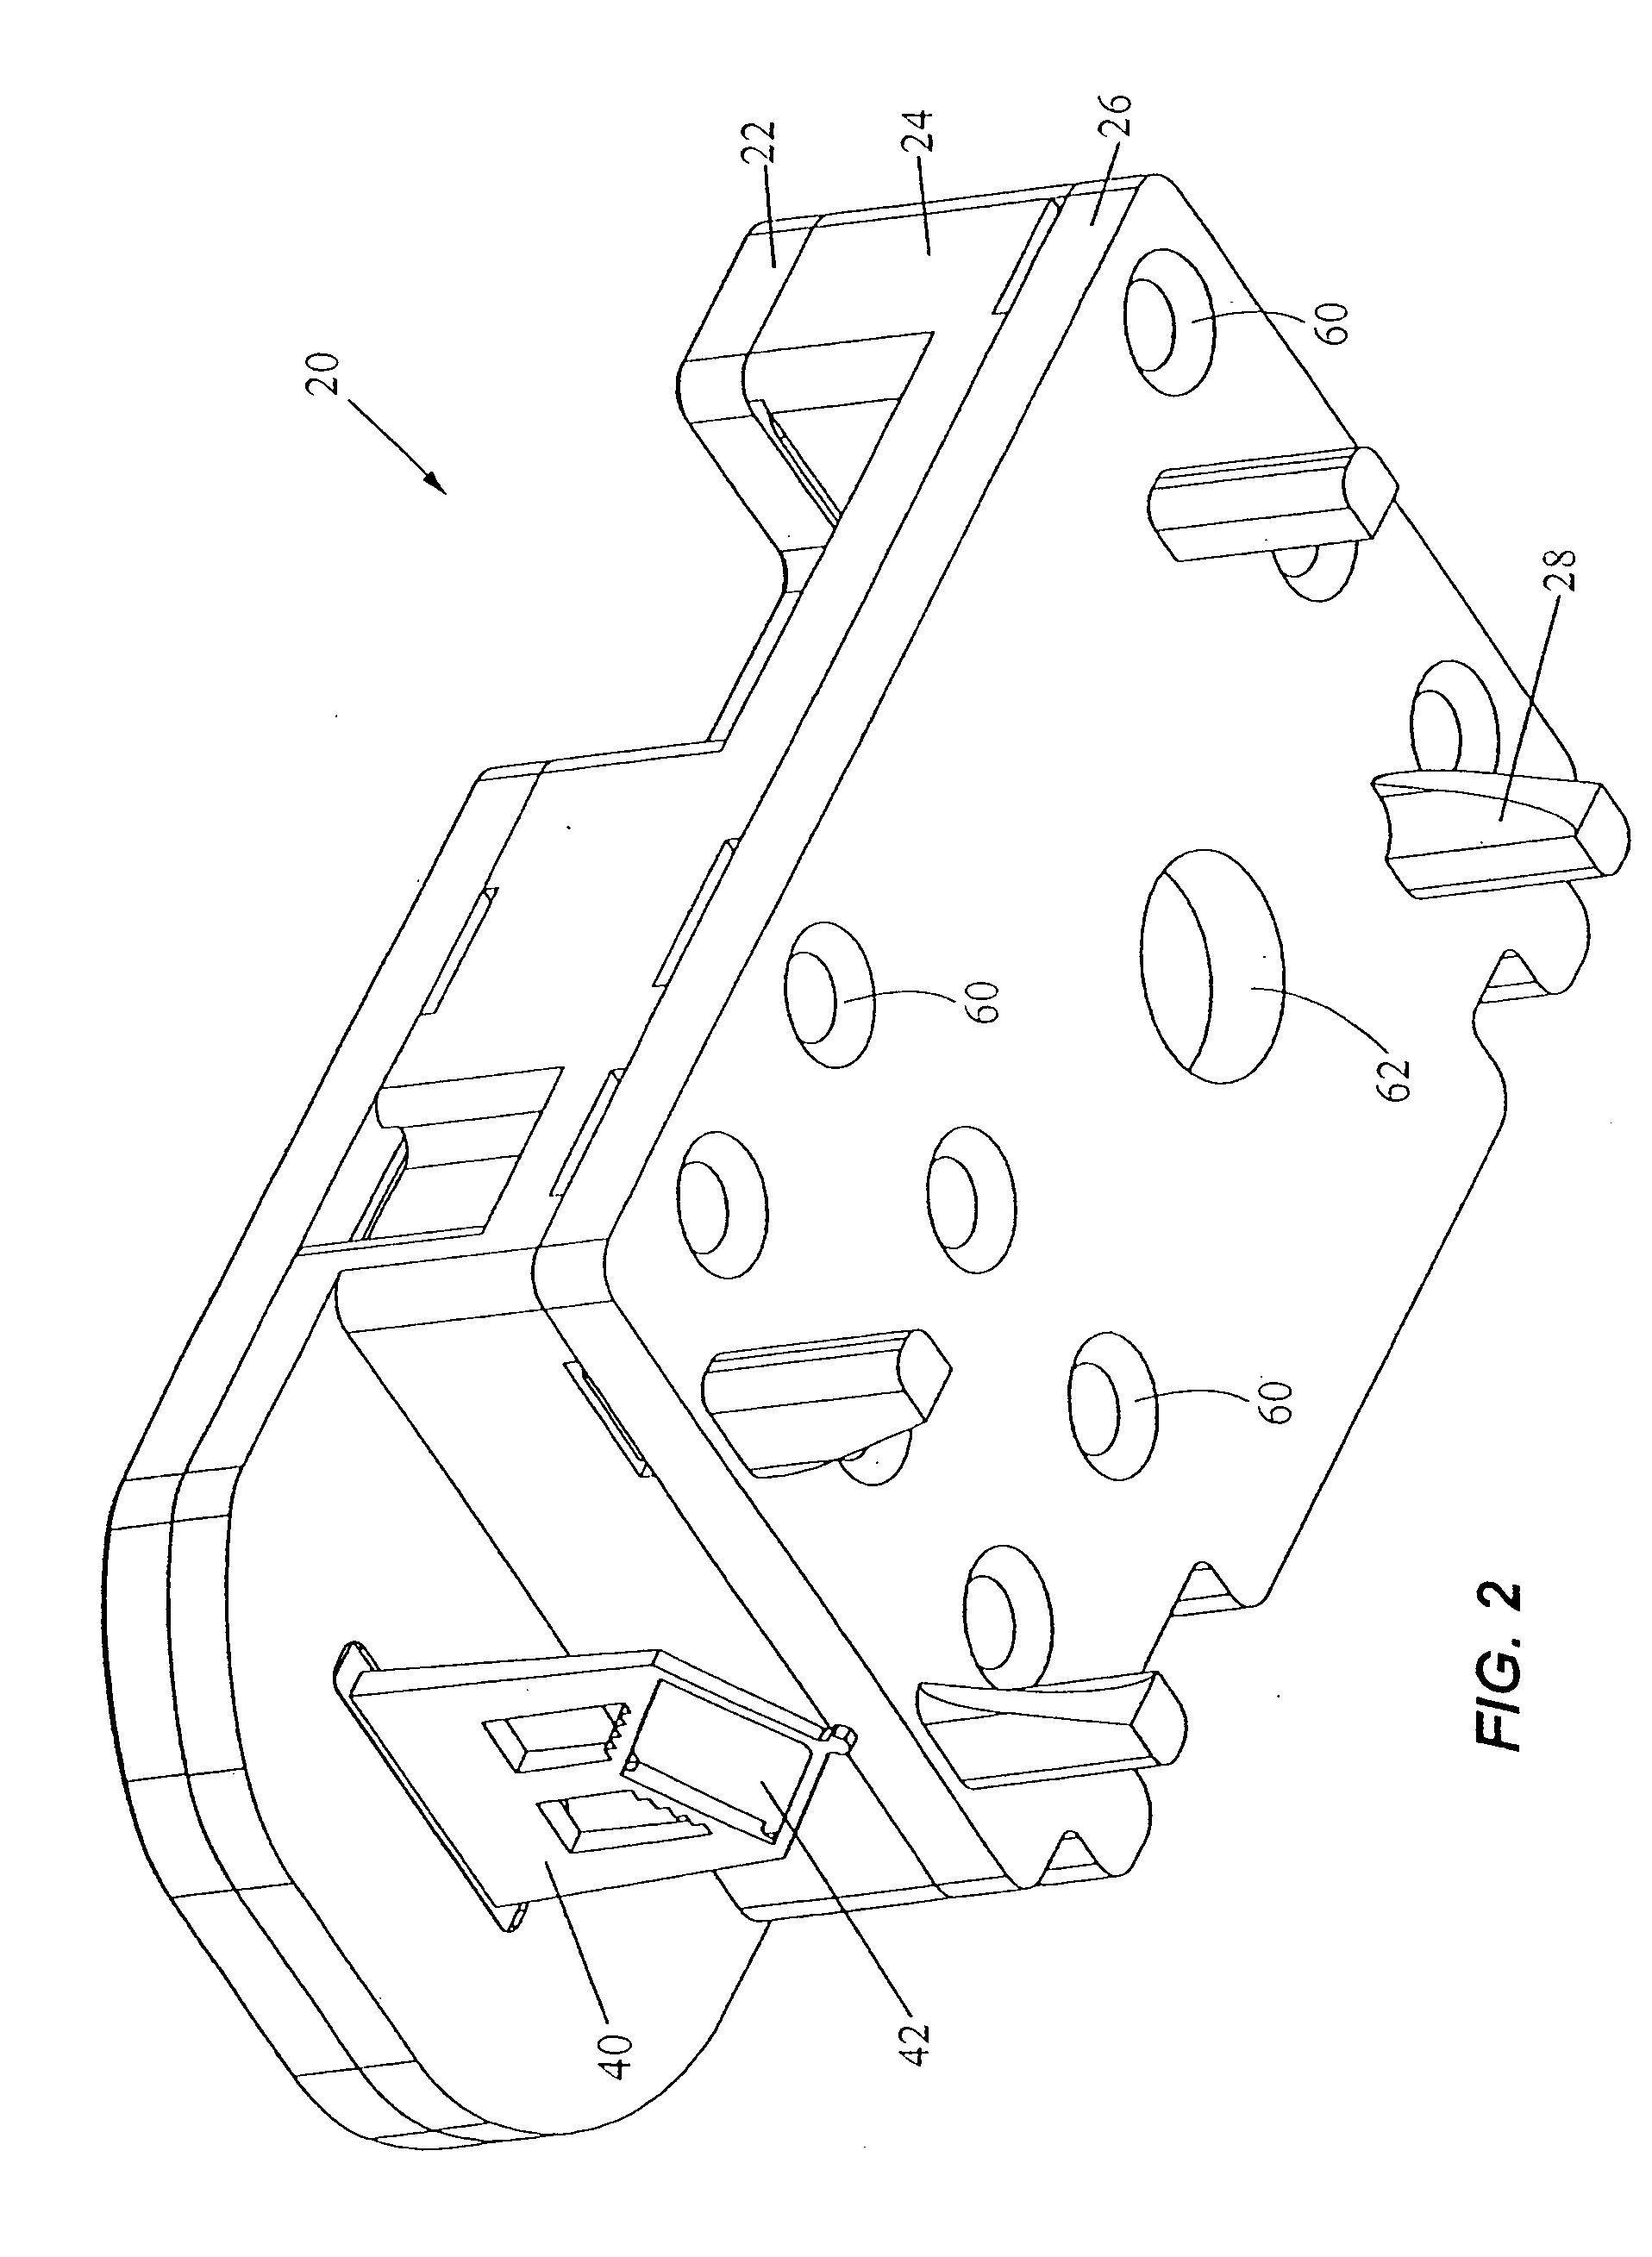 Apparatus and method for cell disruption